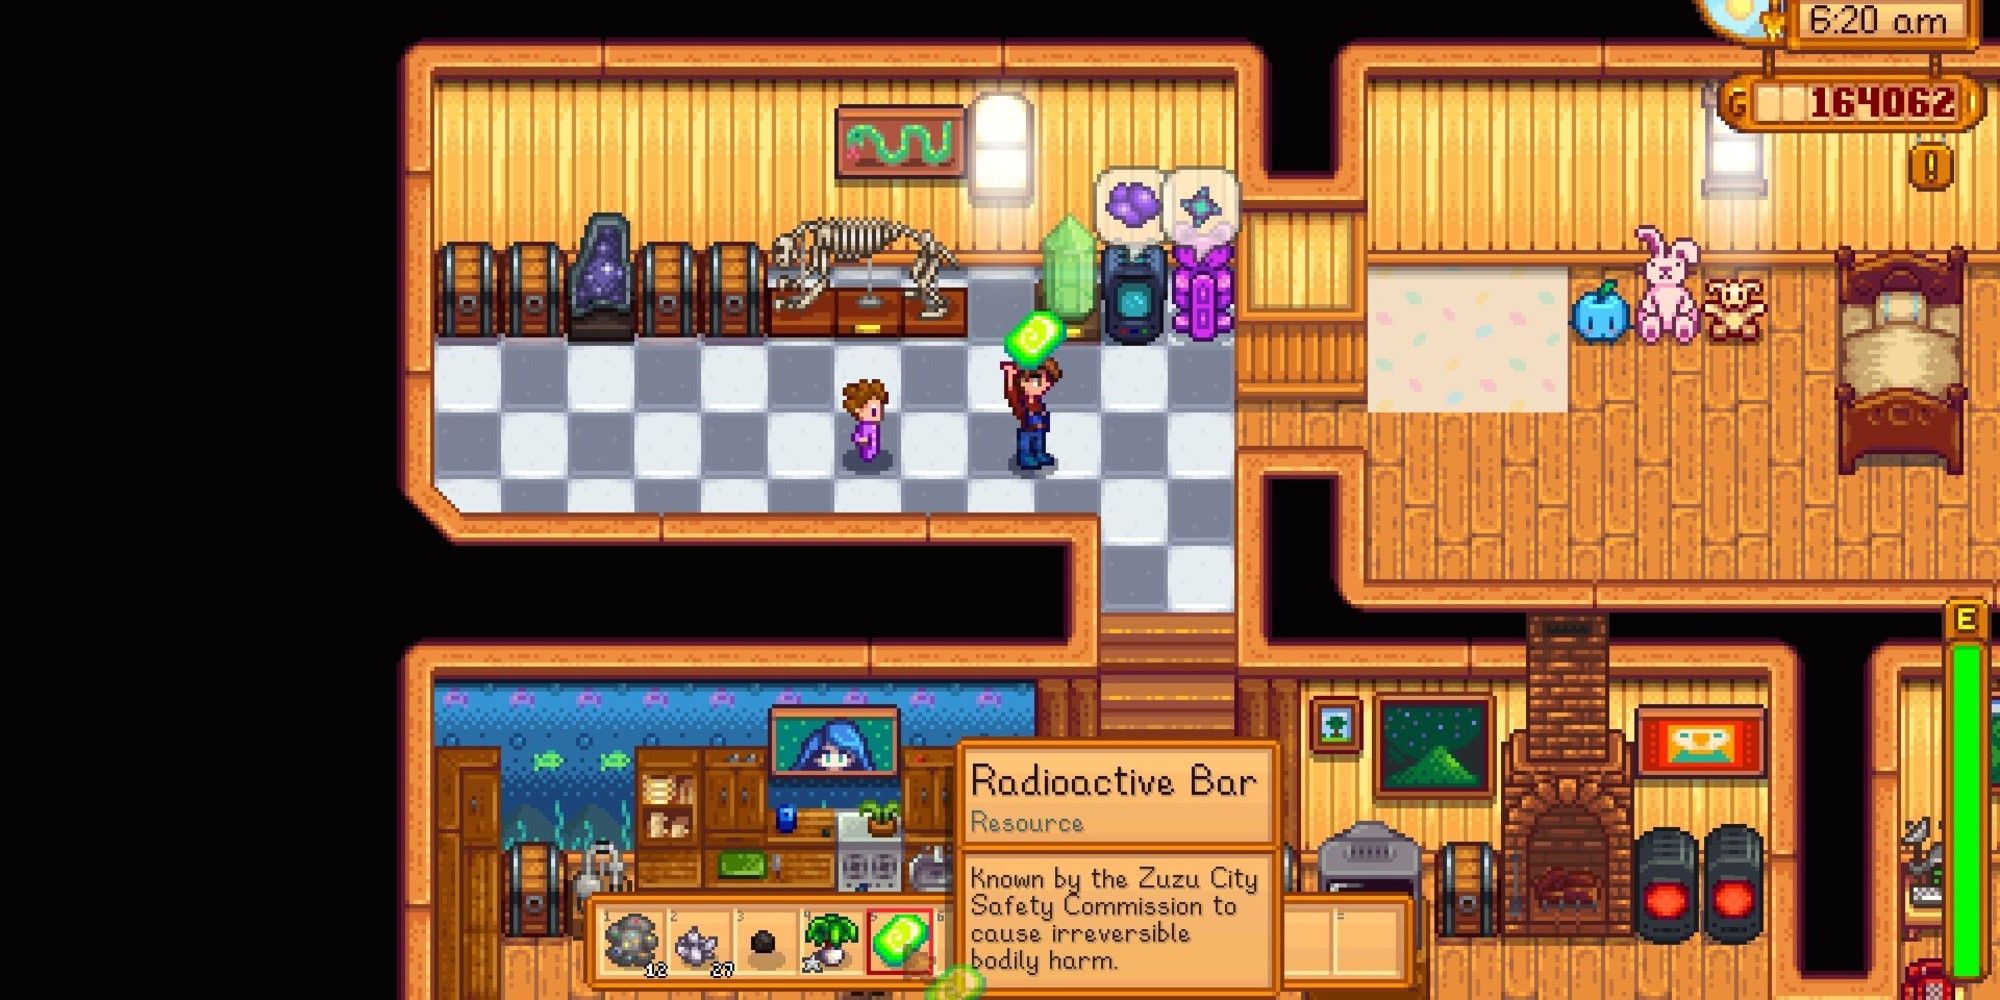 the player holding the radioactive ore in the back of the house